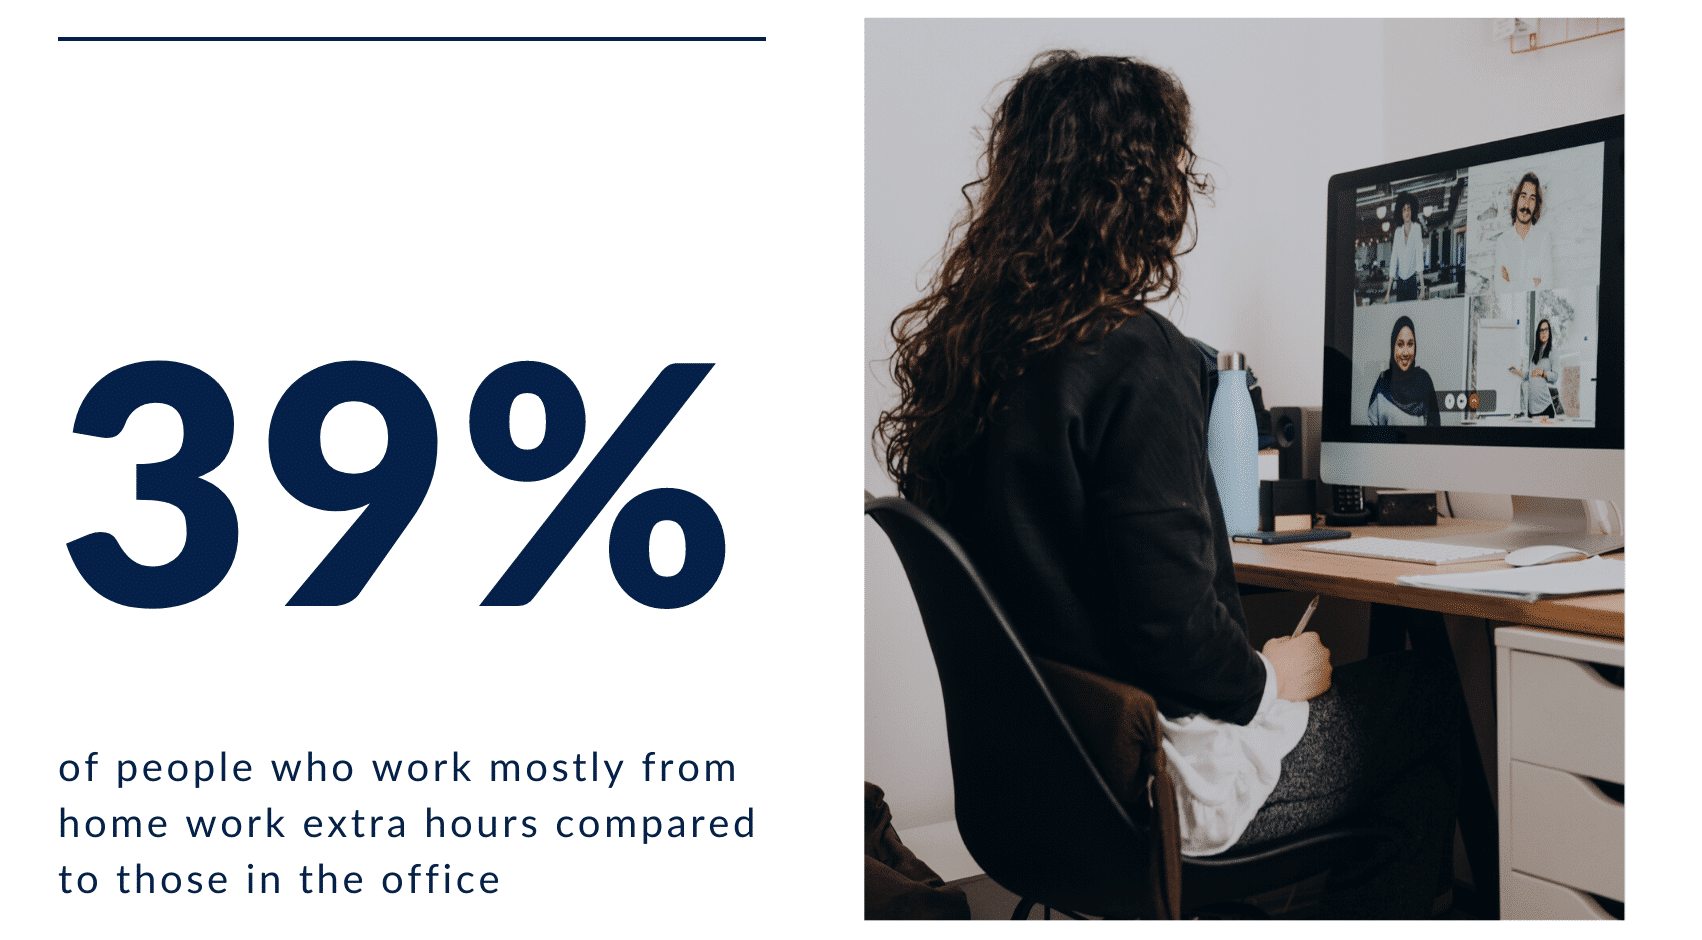 the studies show that 39% of people who work mostly from home work extra hours compared to those in the office